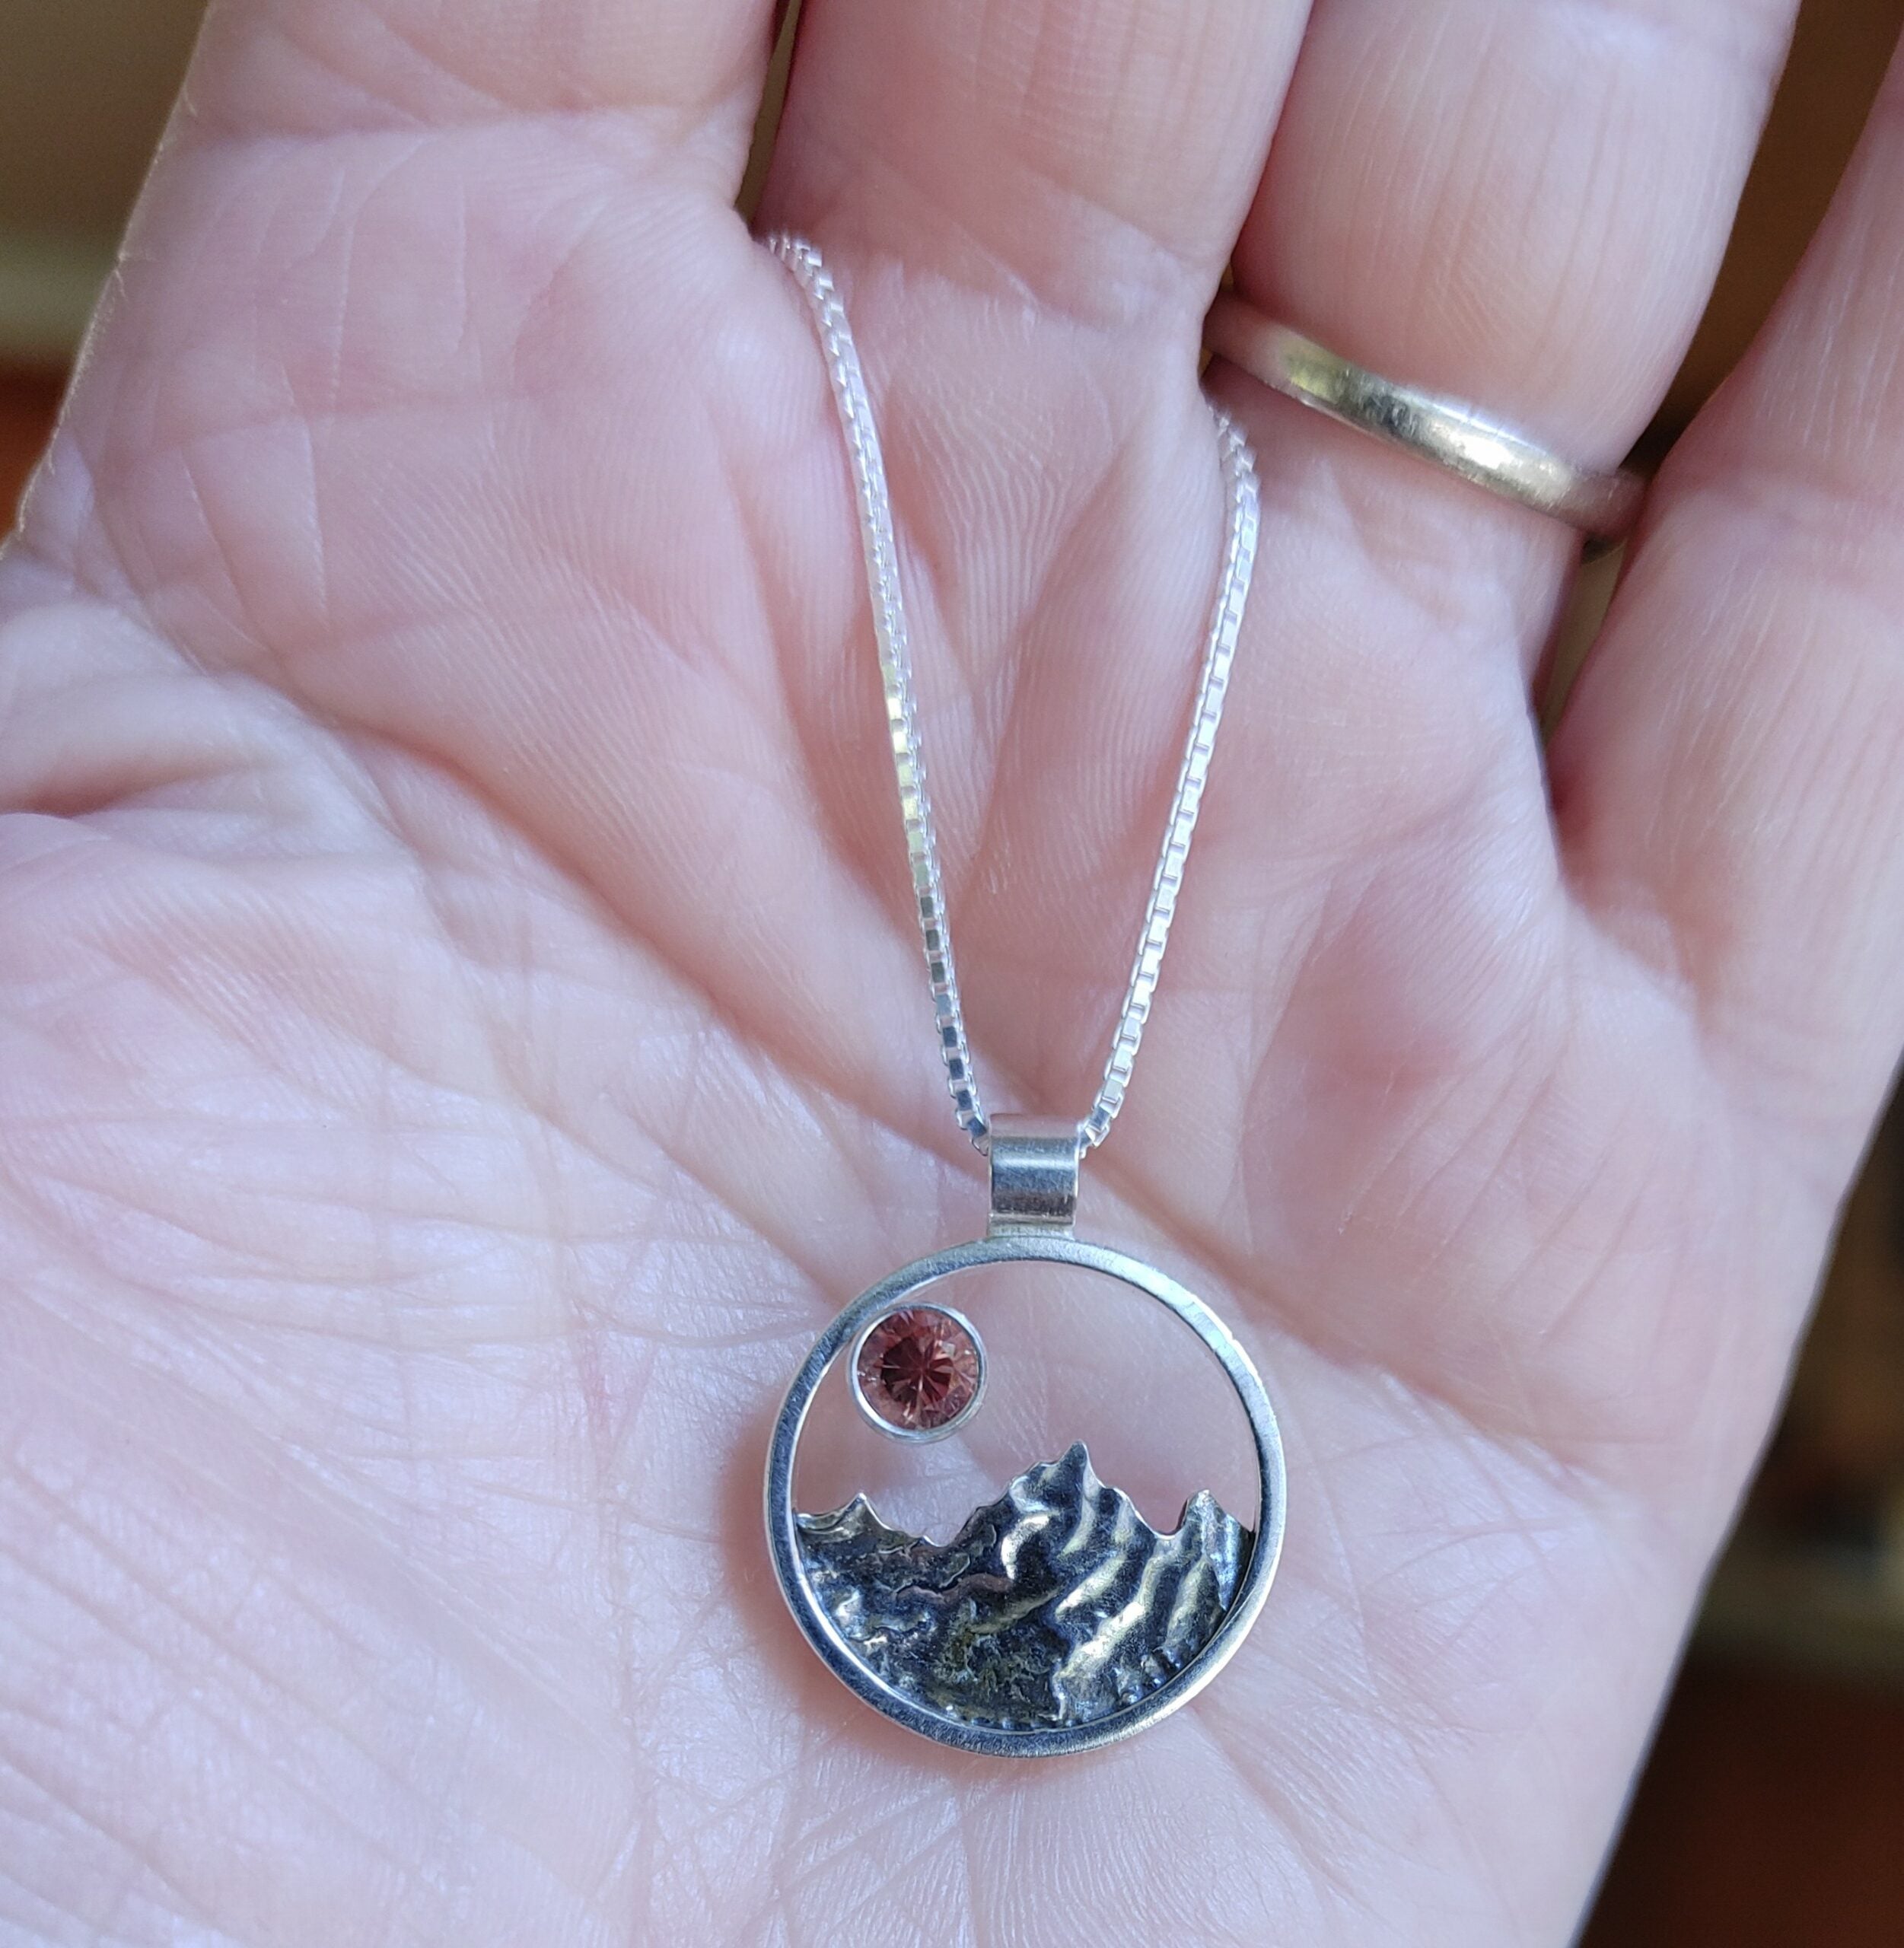 Buy Mountain Necklace, Sterling Silver Mountain Pendant, Mountain Range  Pendant, Mountain Climbing Charm, Adventure Conquer Jewelry Online in India  - Etsy